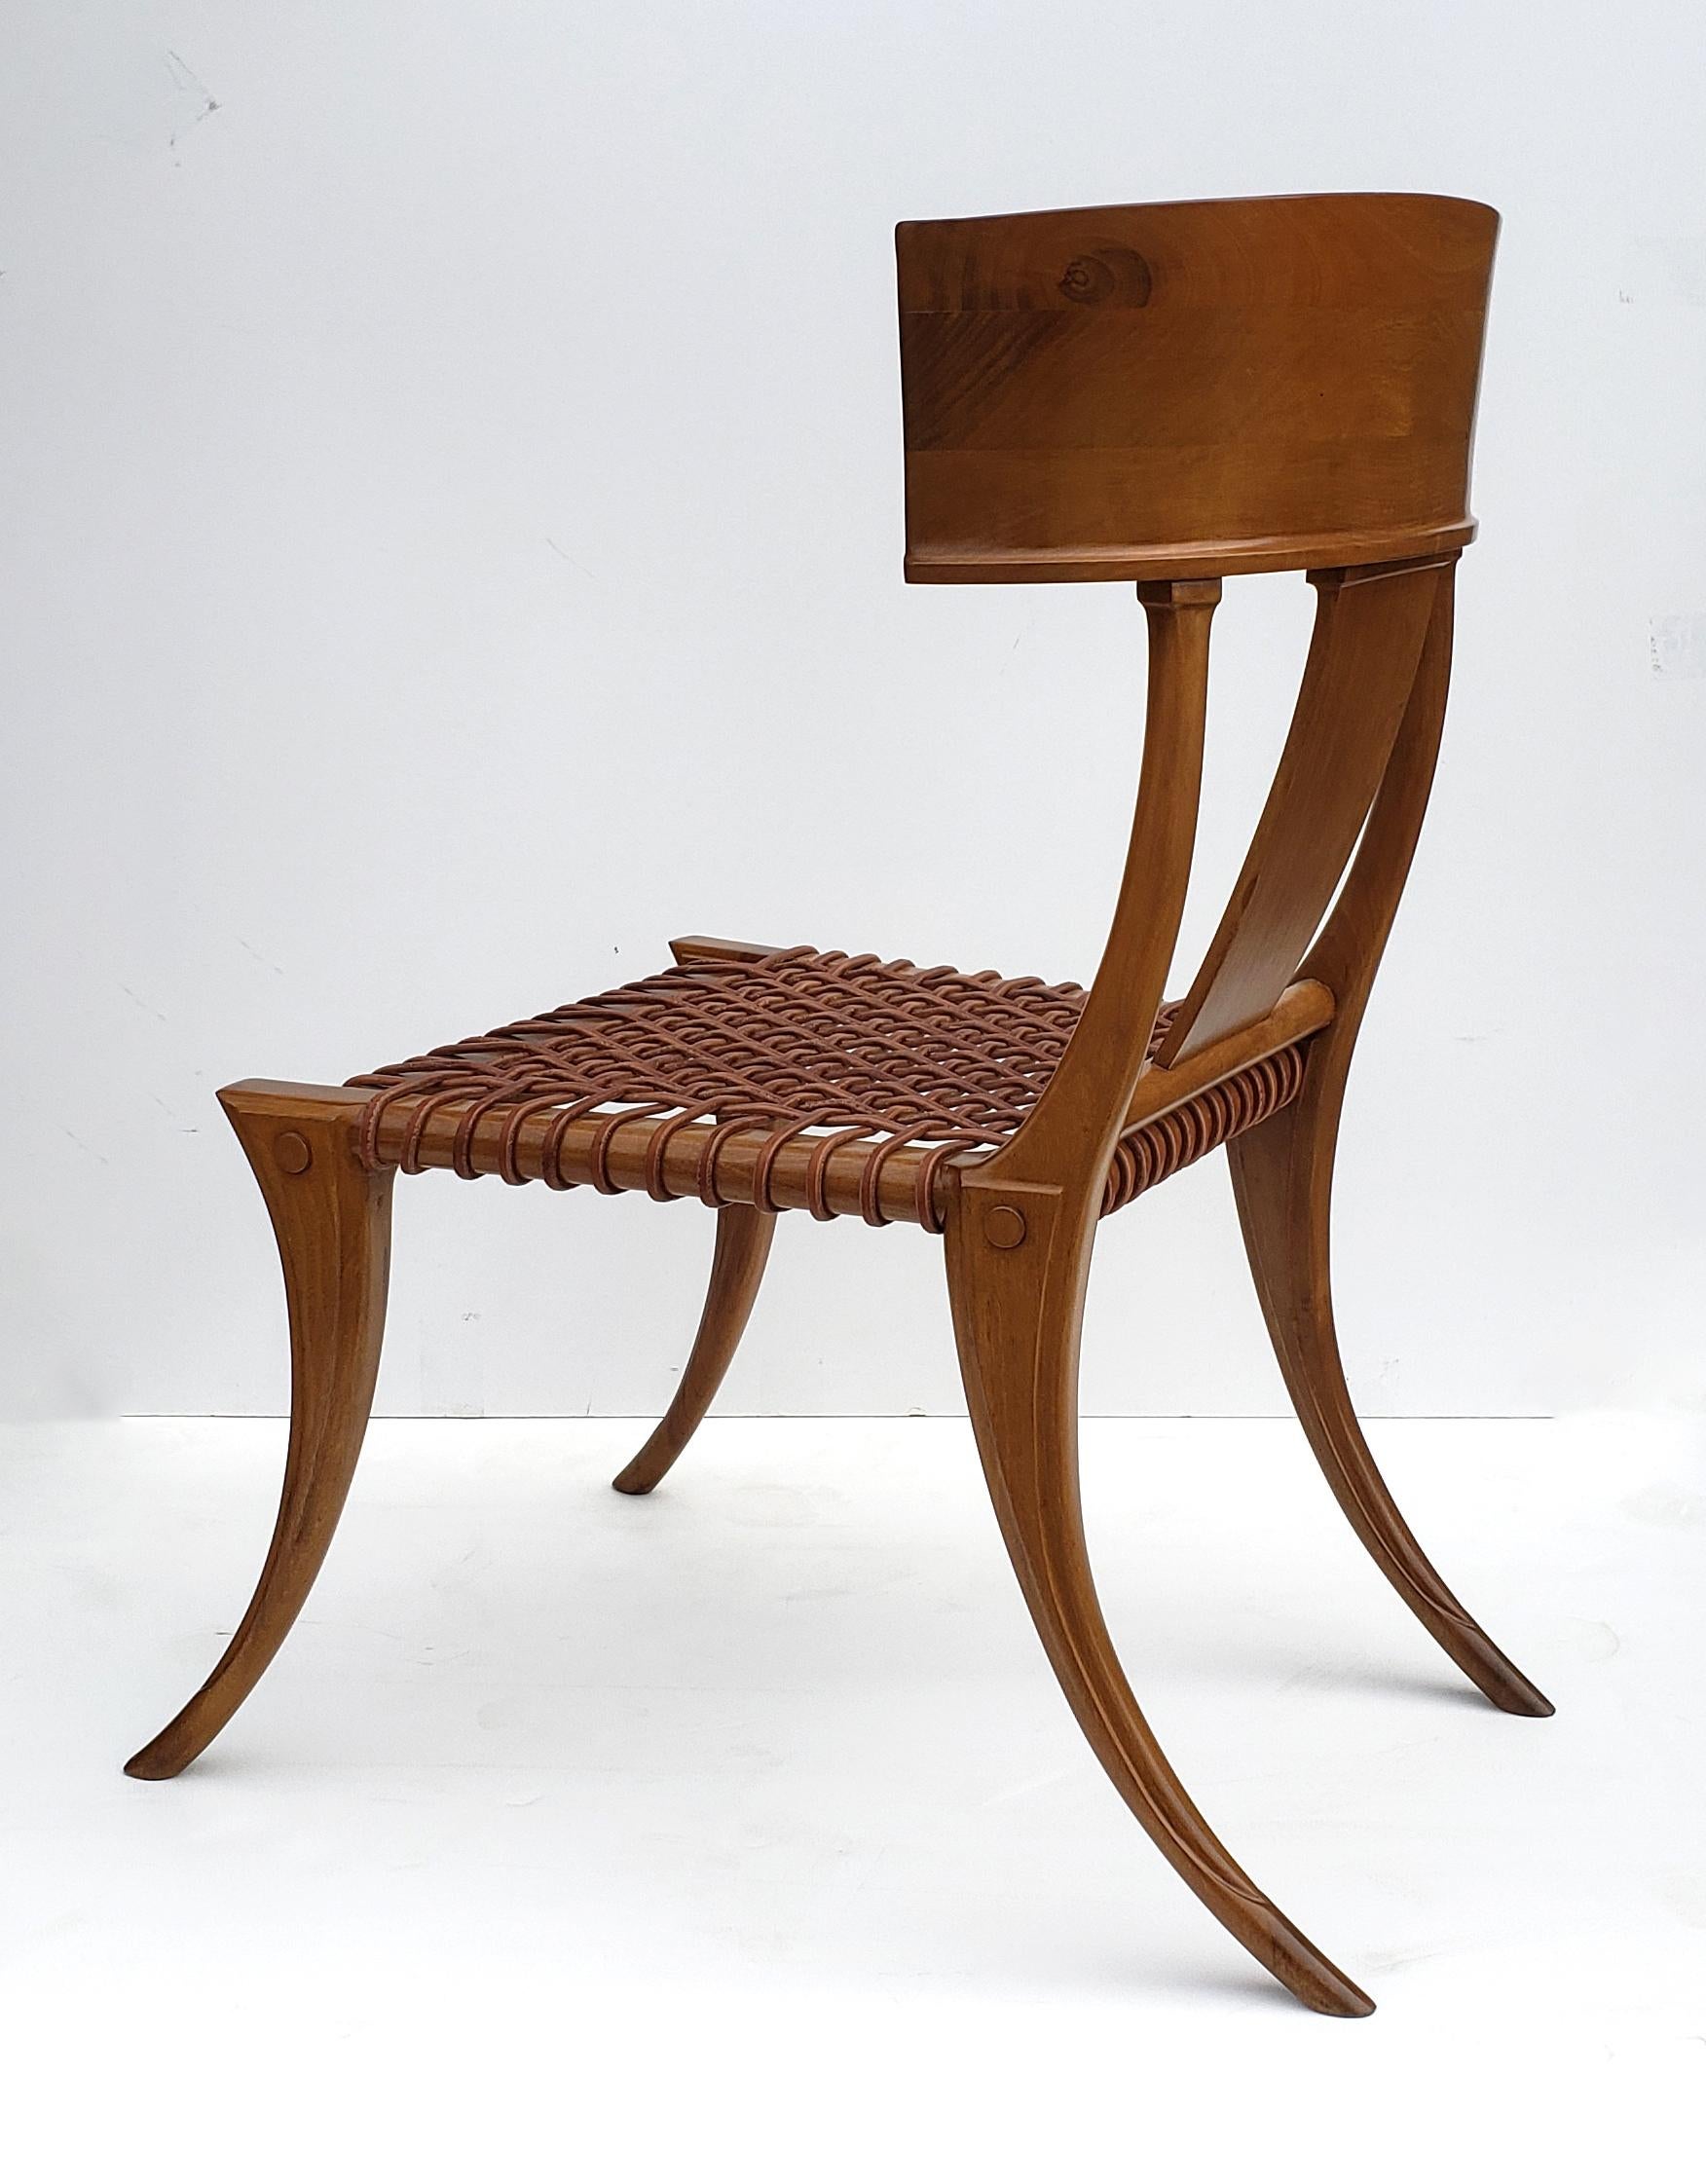 20th Century T.H. Robsjohn-Gibbings Klismos Chair for Saridis of Athens in Walnut and Leather